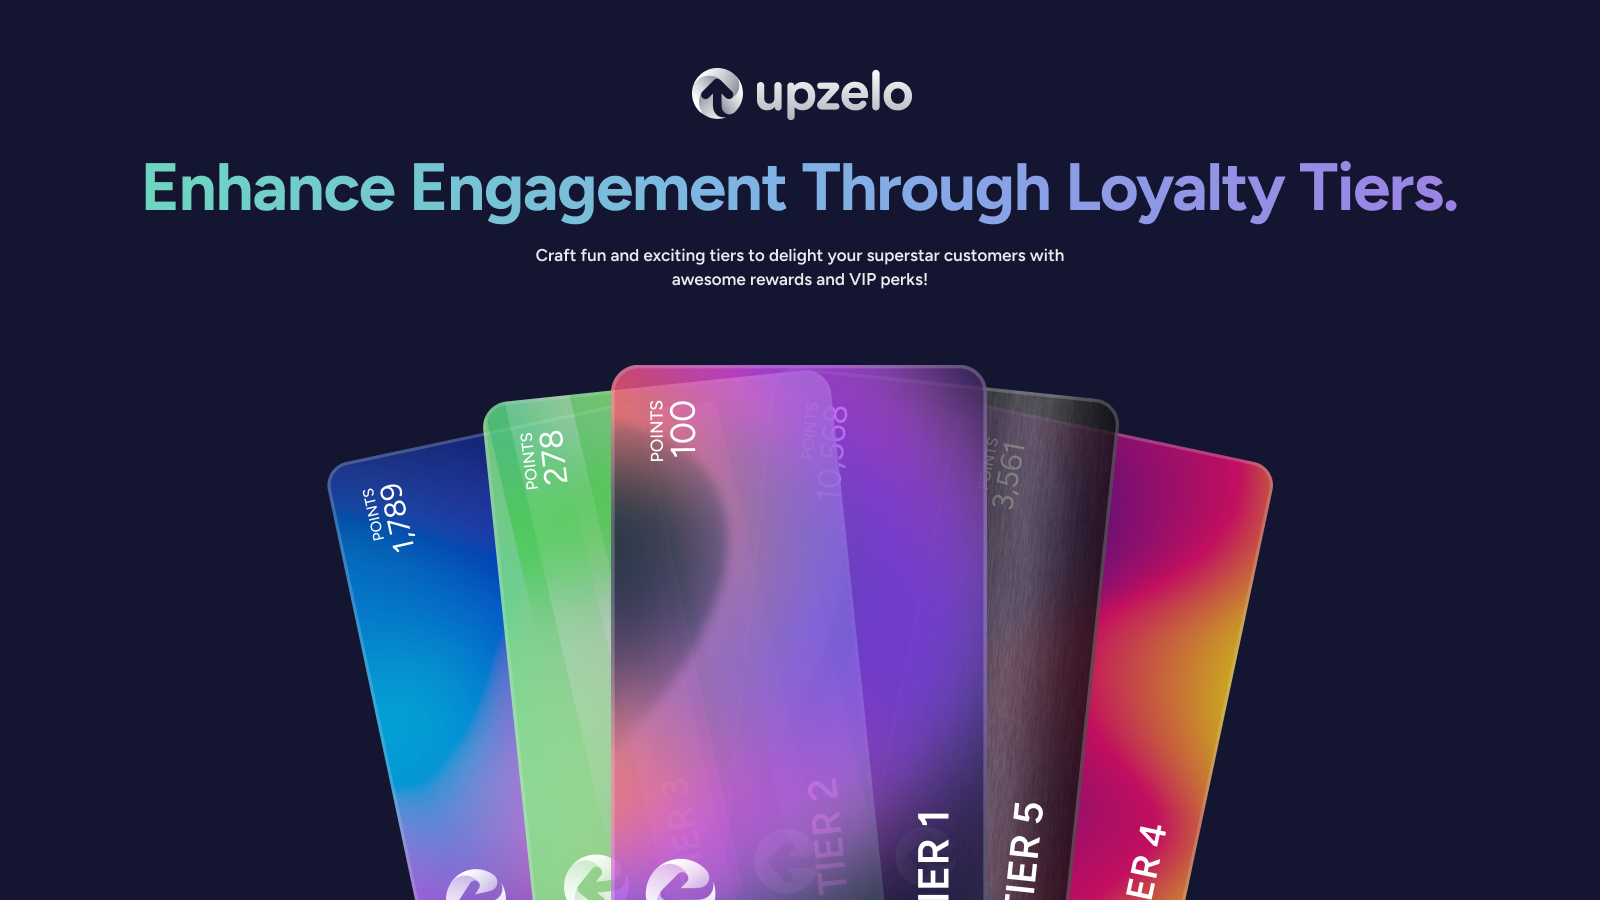 Enhance Engagement Through Loyalty Tiers. Craft fun and exciting tiers to delight your superstar customers with awesome rewards and VIP perks!